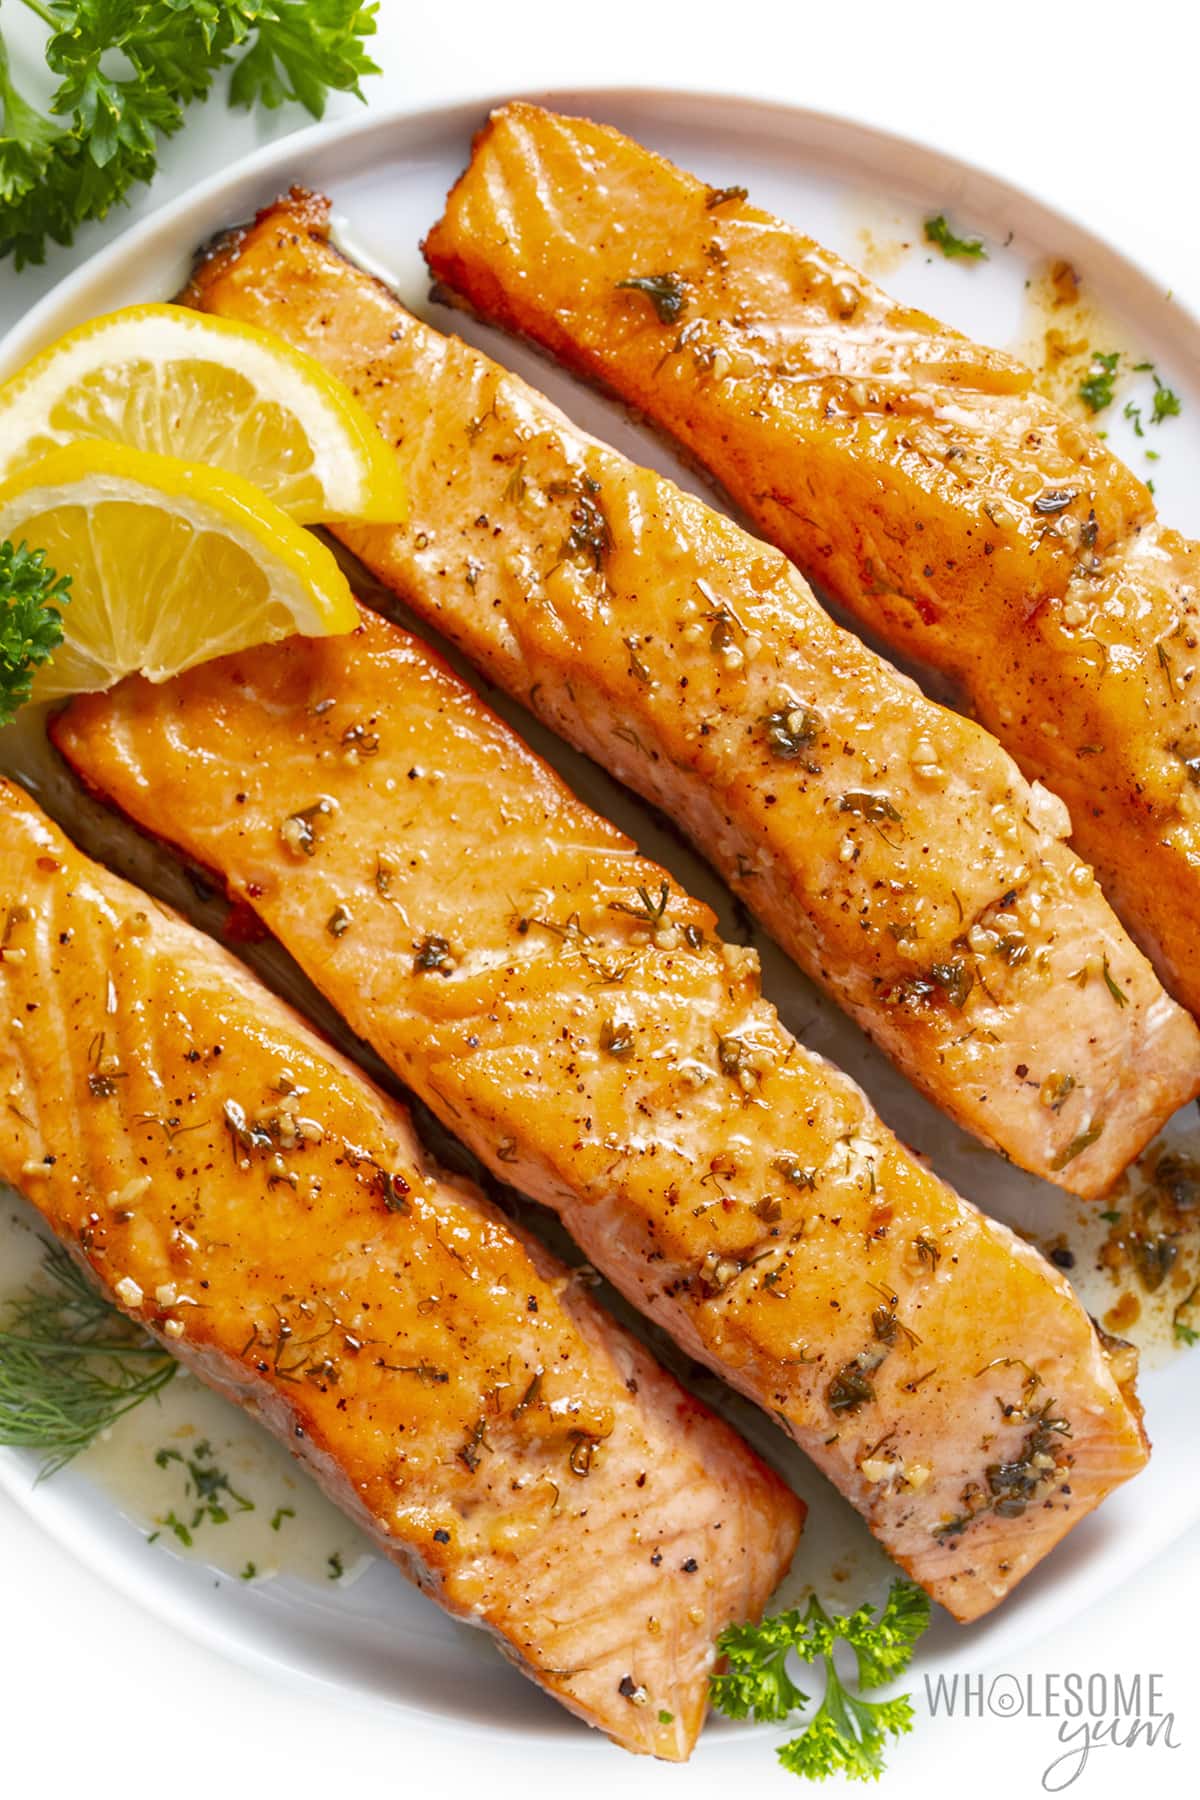 Pan seared salmon recipe with lemon slices and parsley.